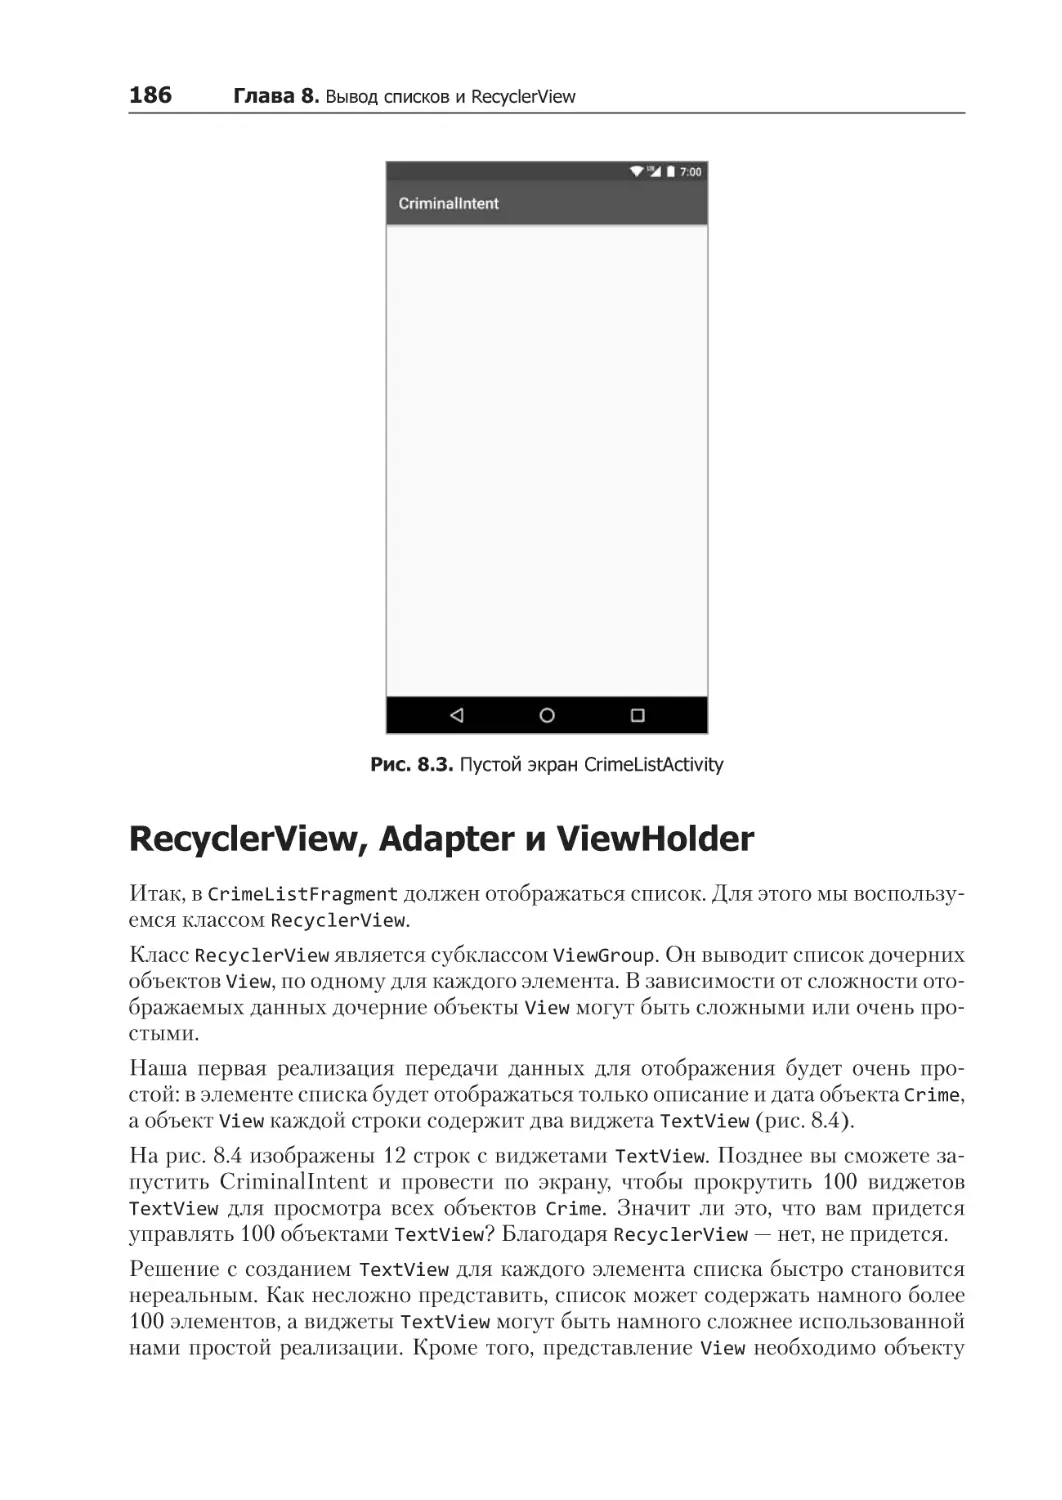 RecyclerView, Adapter и ViewHolder